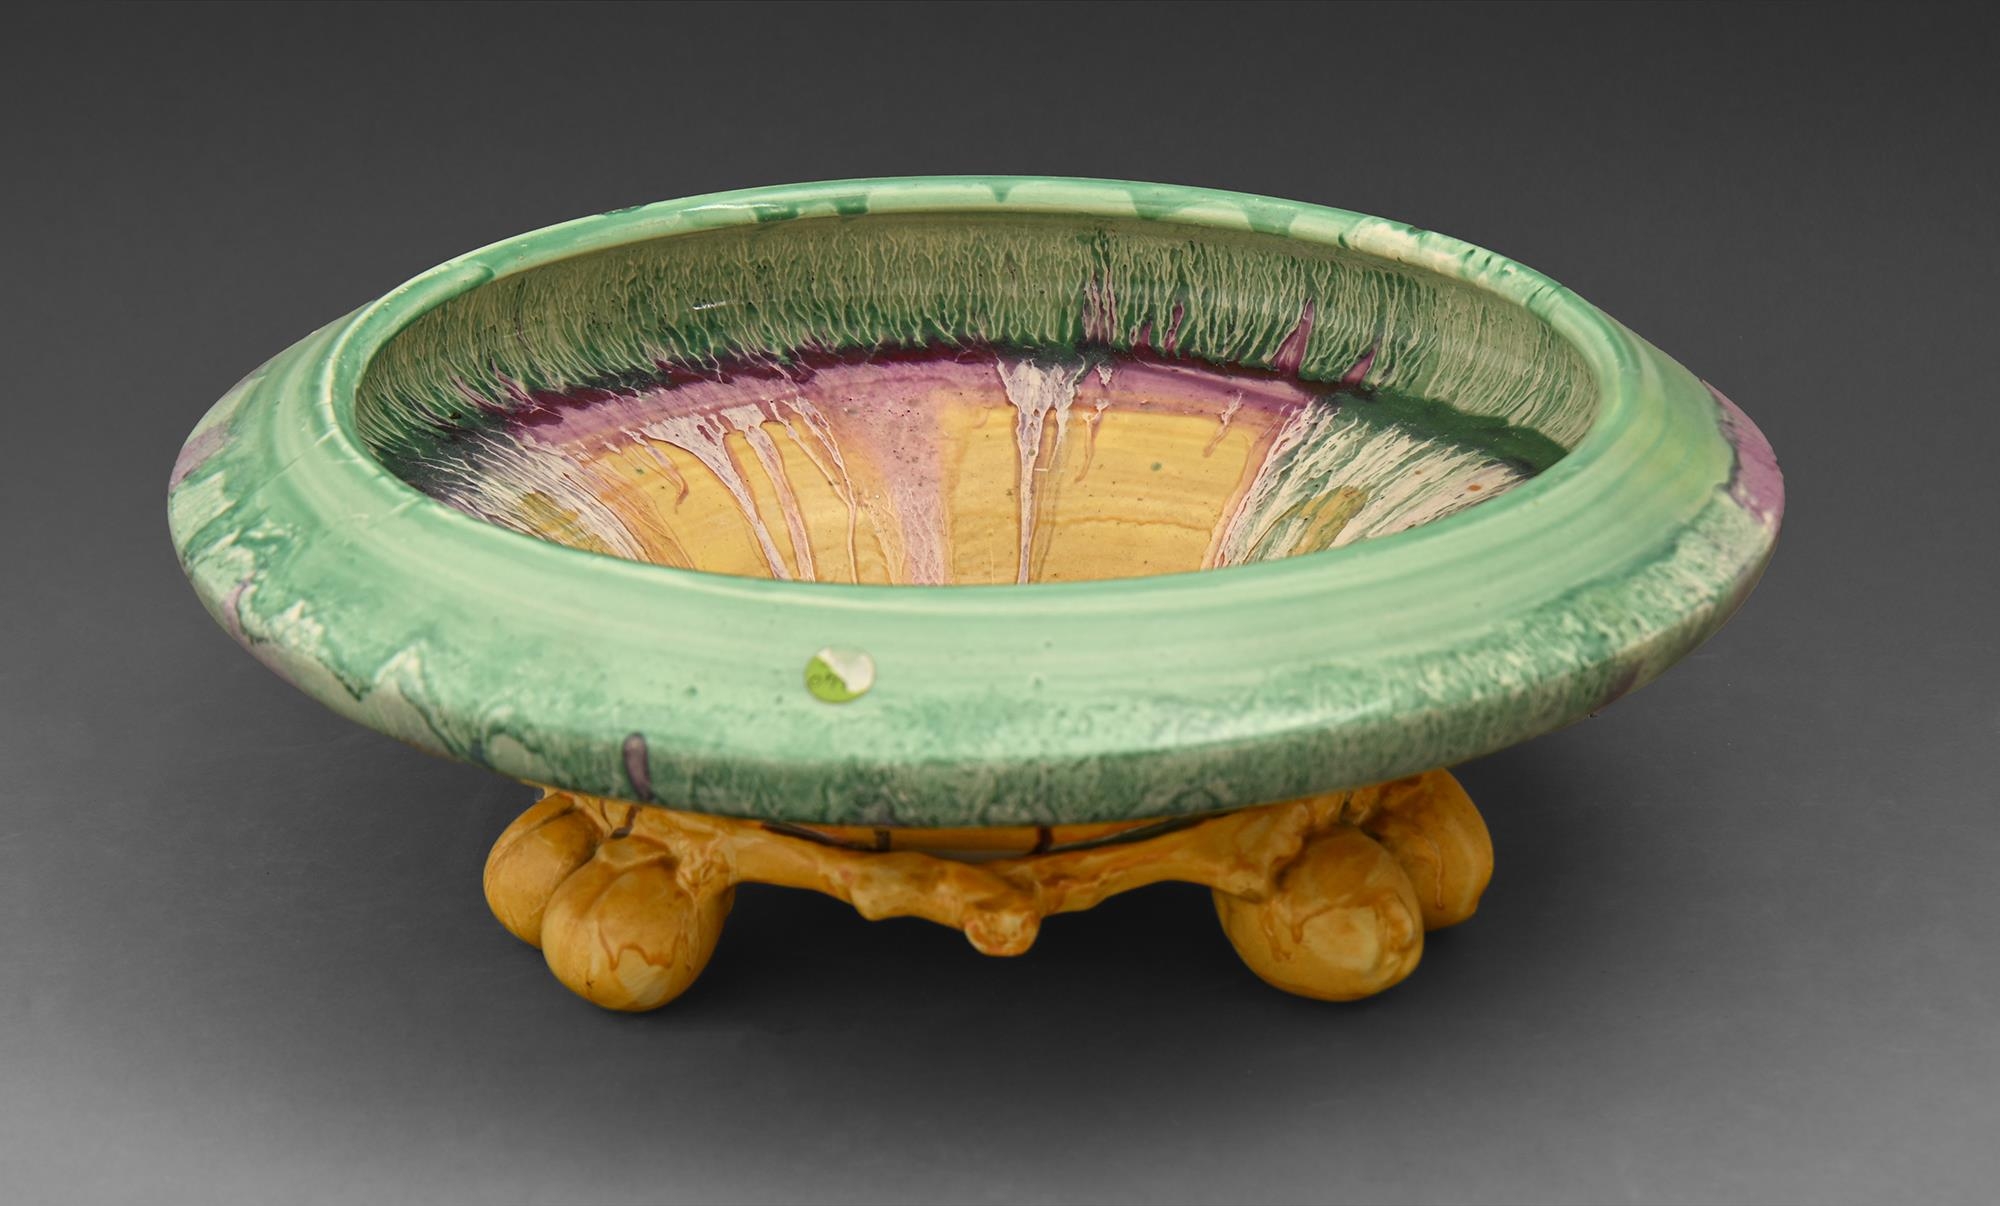 A Clarice Cliff Delicia footed bowl,  33cm diam Interior slightly worn, area of green degraded paint